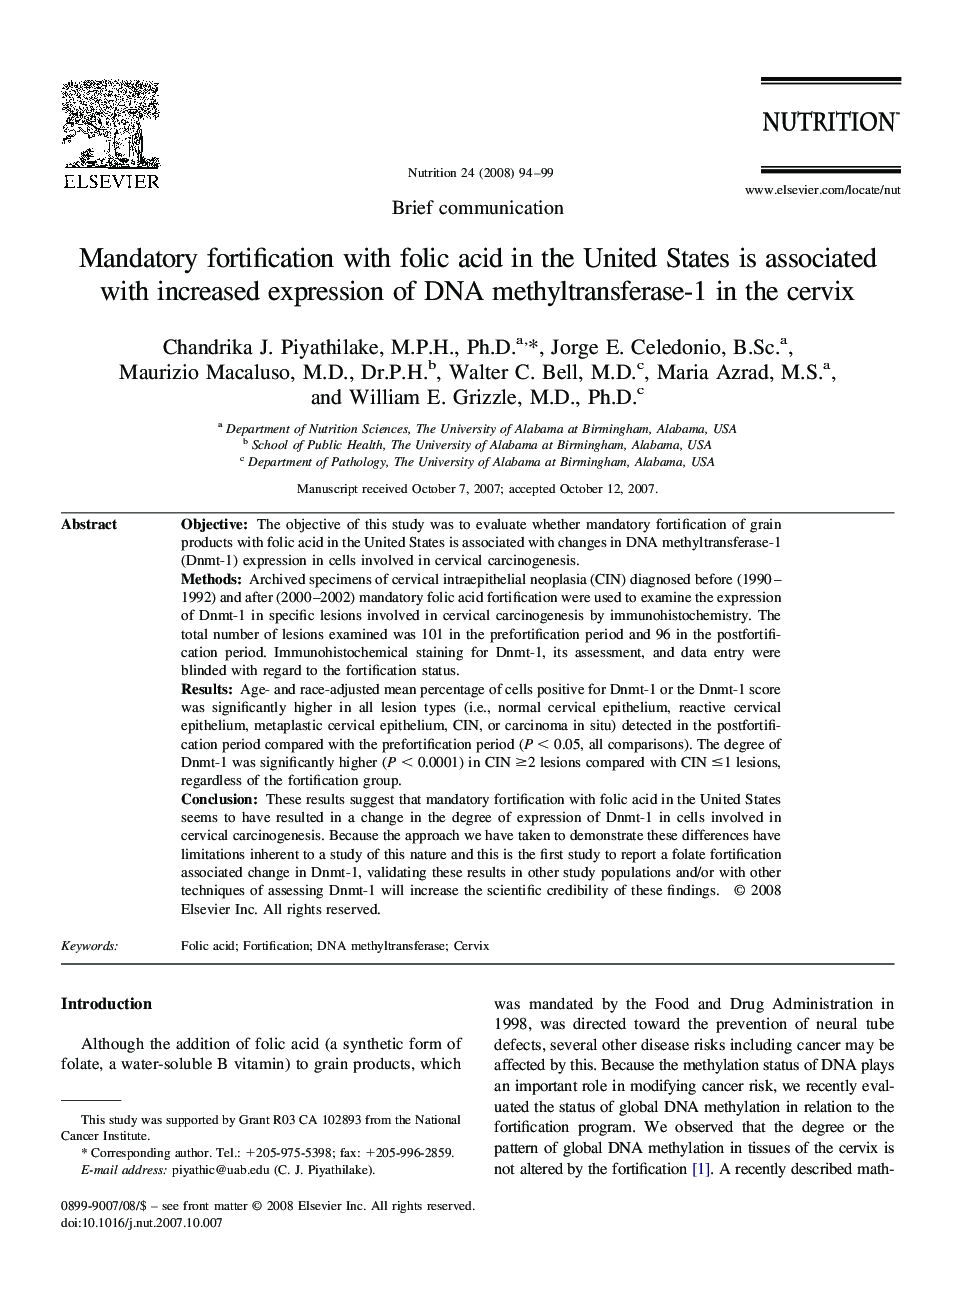 Mandatory fortification with folic acid in the United States is associated with increased expression of DNA methyltransferase-1 in the cervix 